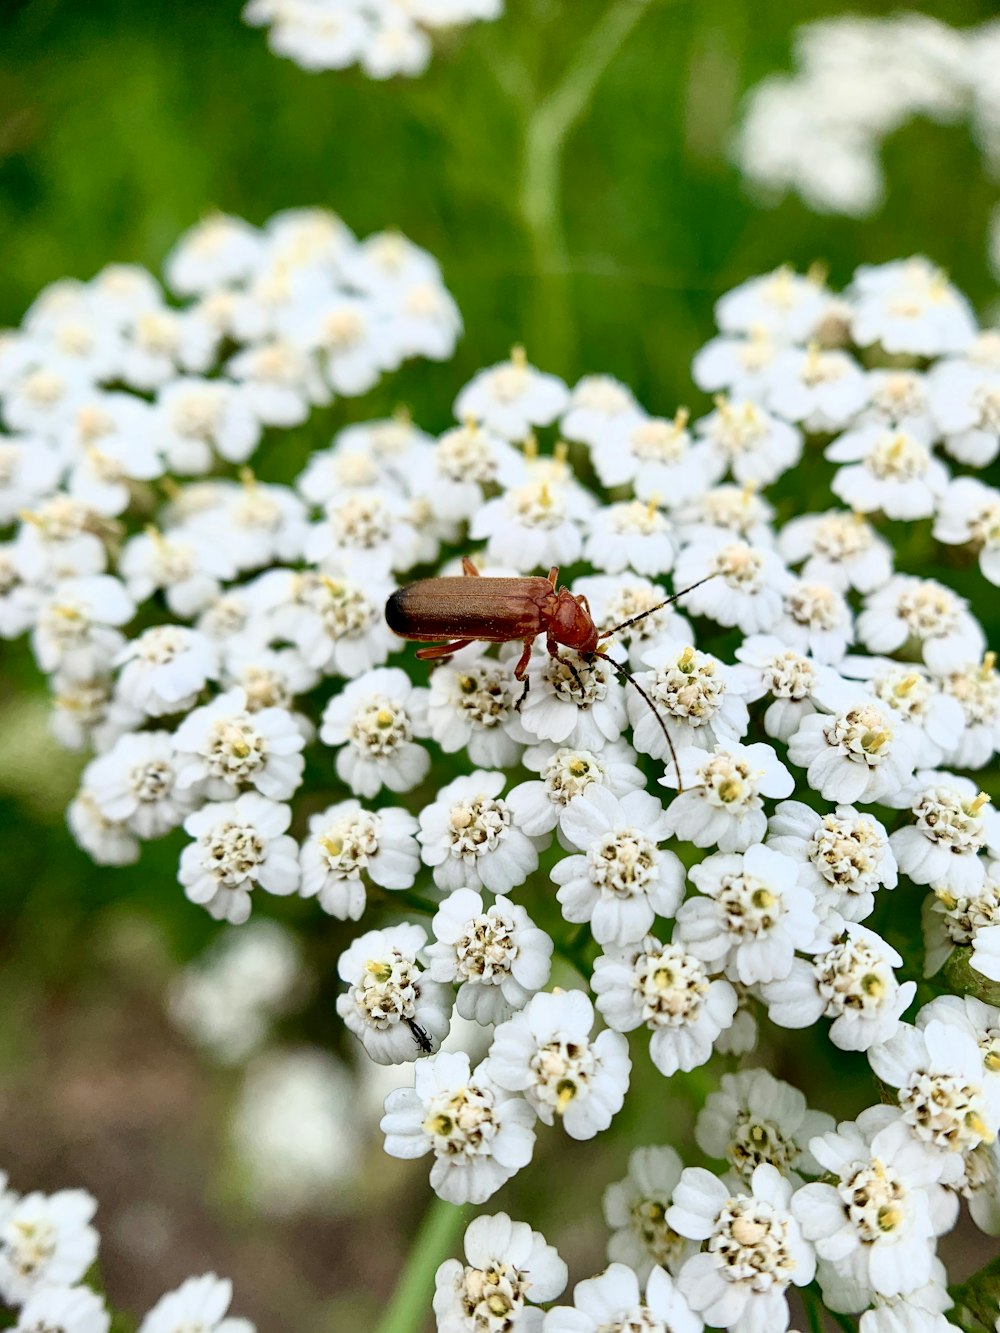 brown and black insect on white flowers